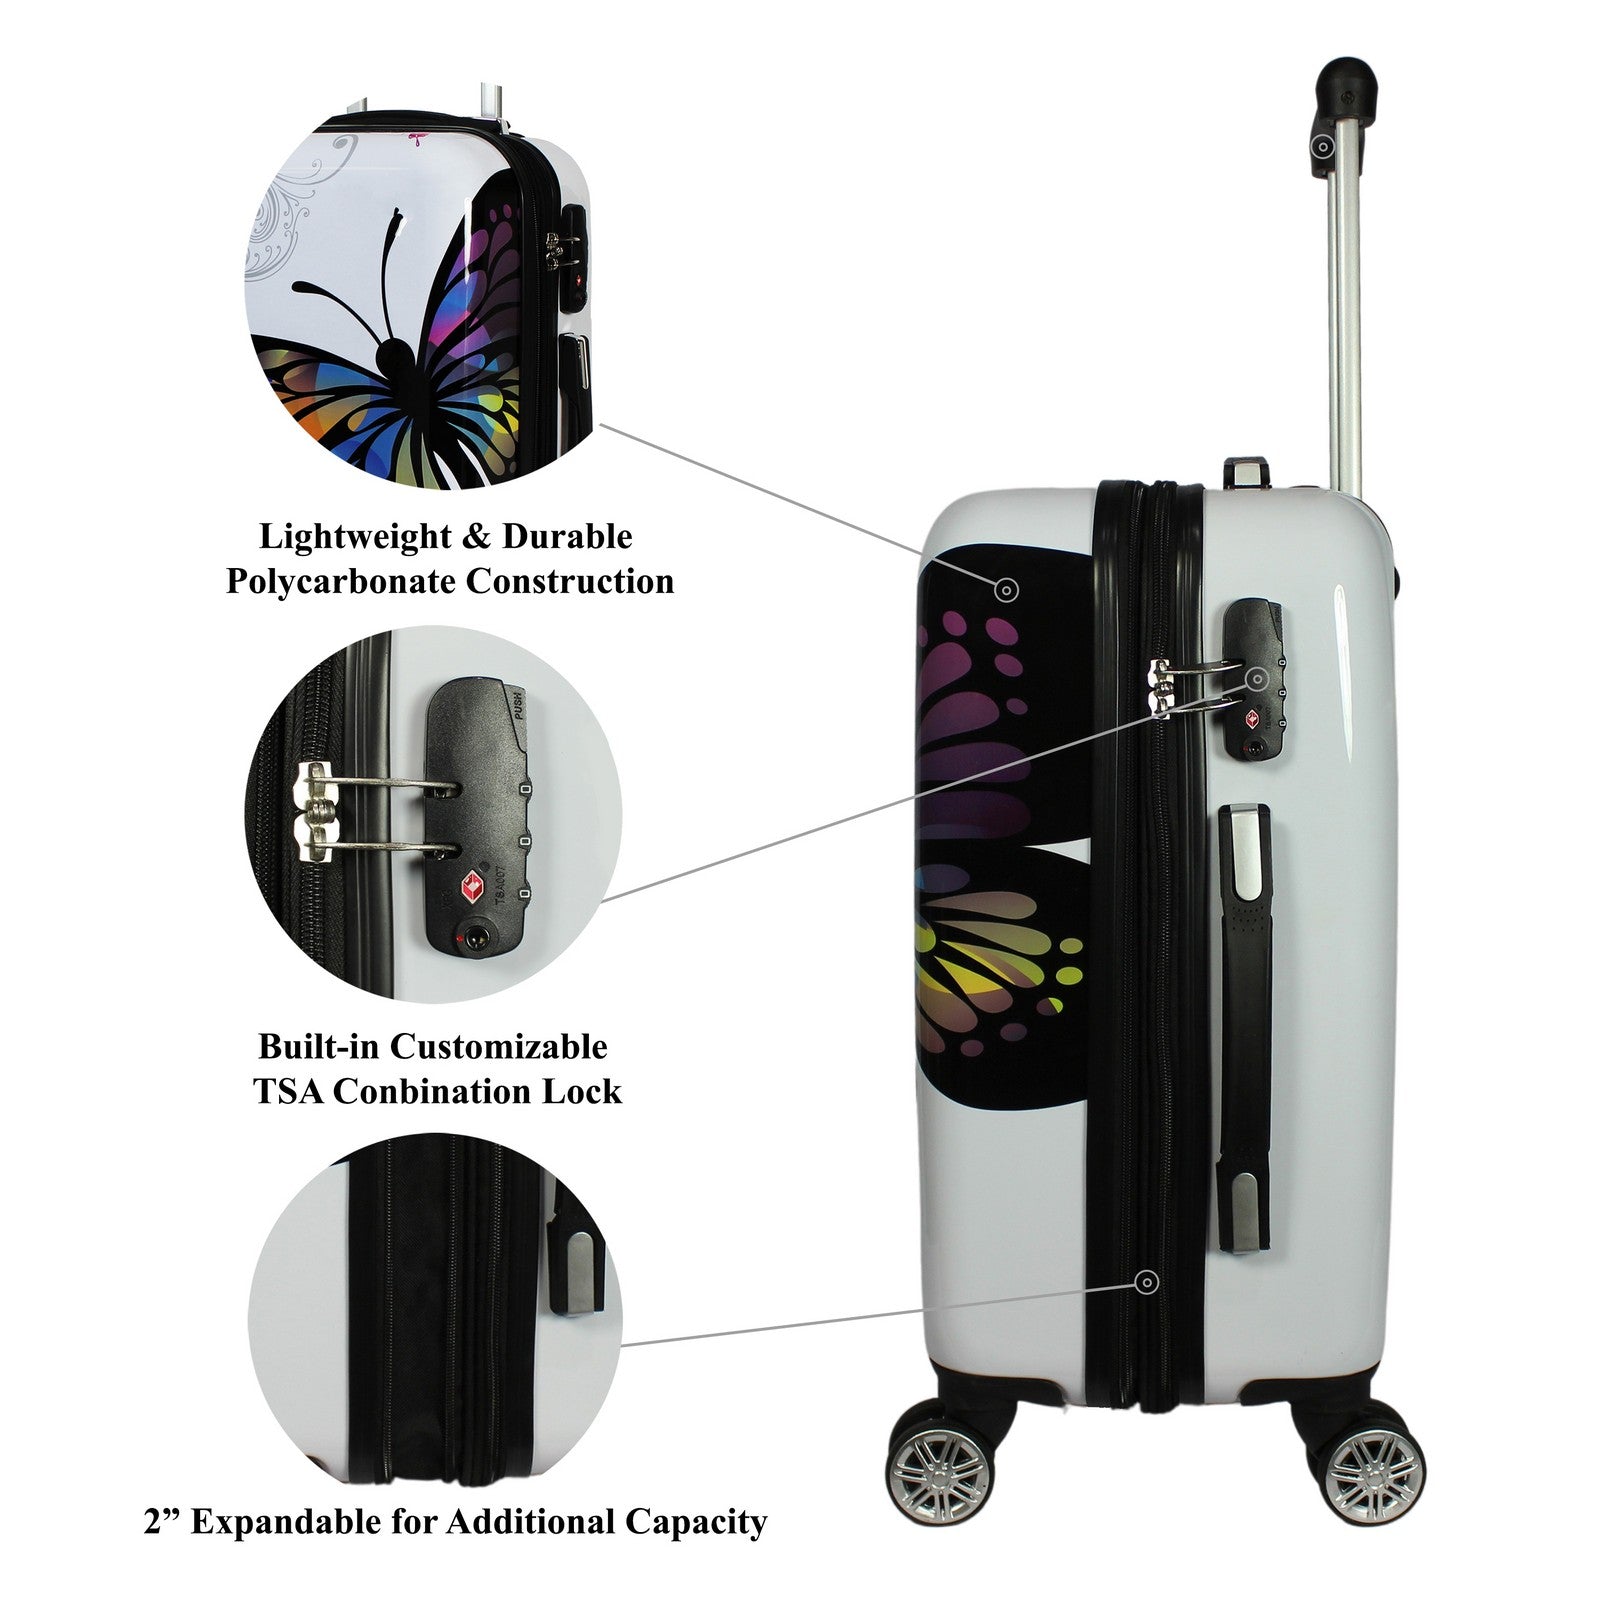 World Traveler Butterfly 28-Inch Hardside Expandable Spinner Luggage